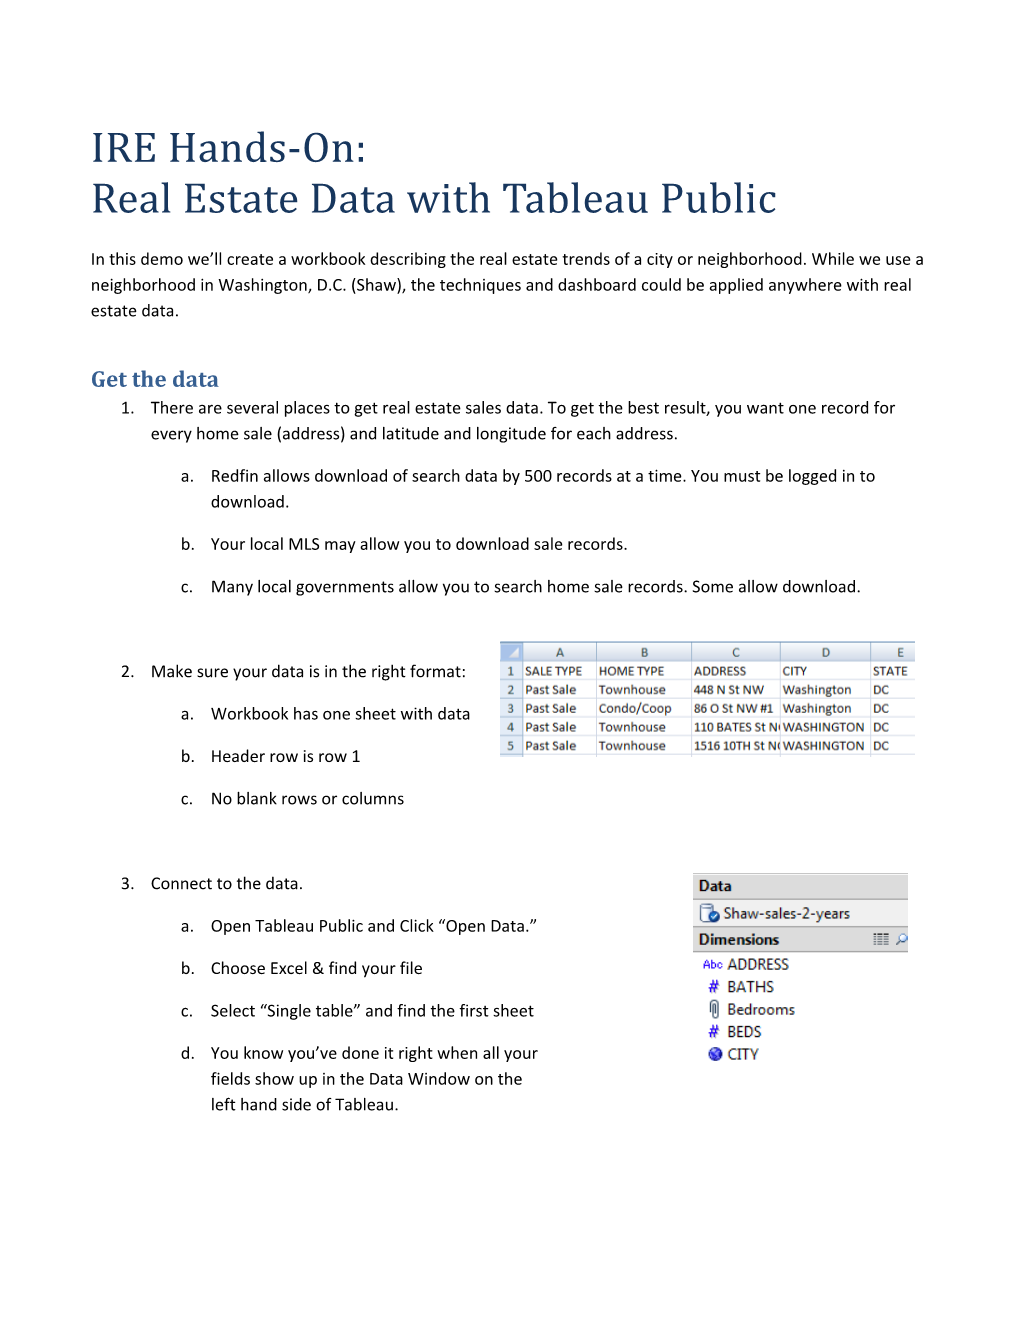 IRE Hands-On: Real Estate Data with Tableau Public